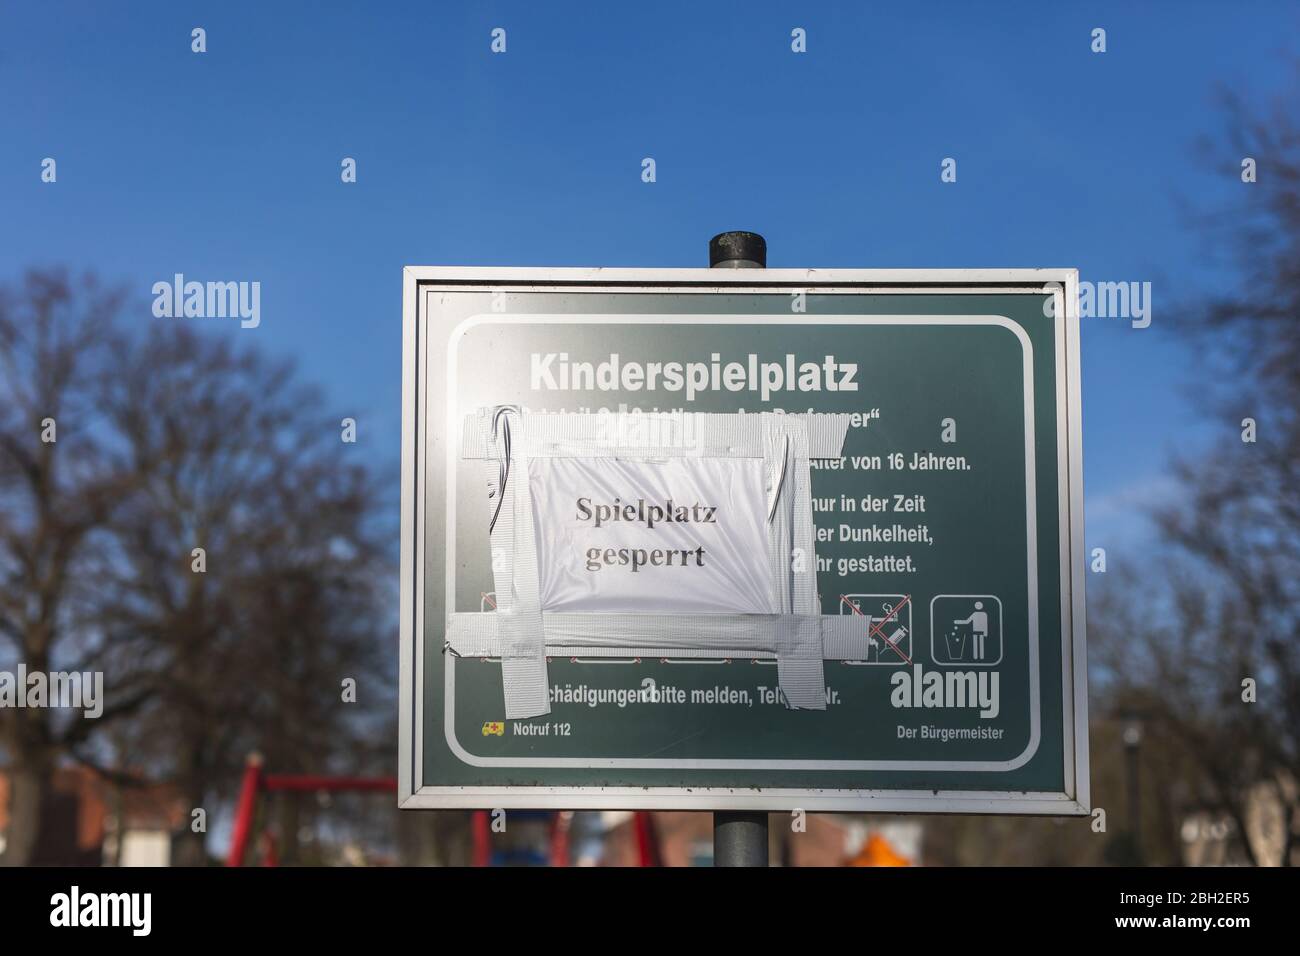 Germany, Brandenburg, Playground closed message taped on playground information sign during COVID-19 epidemic Stock Photo